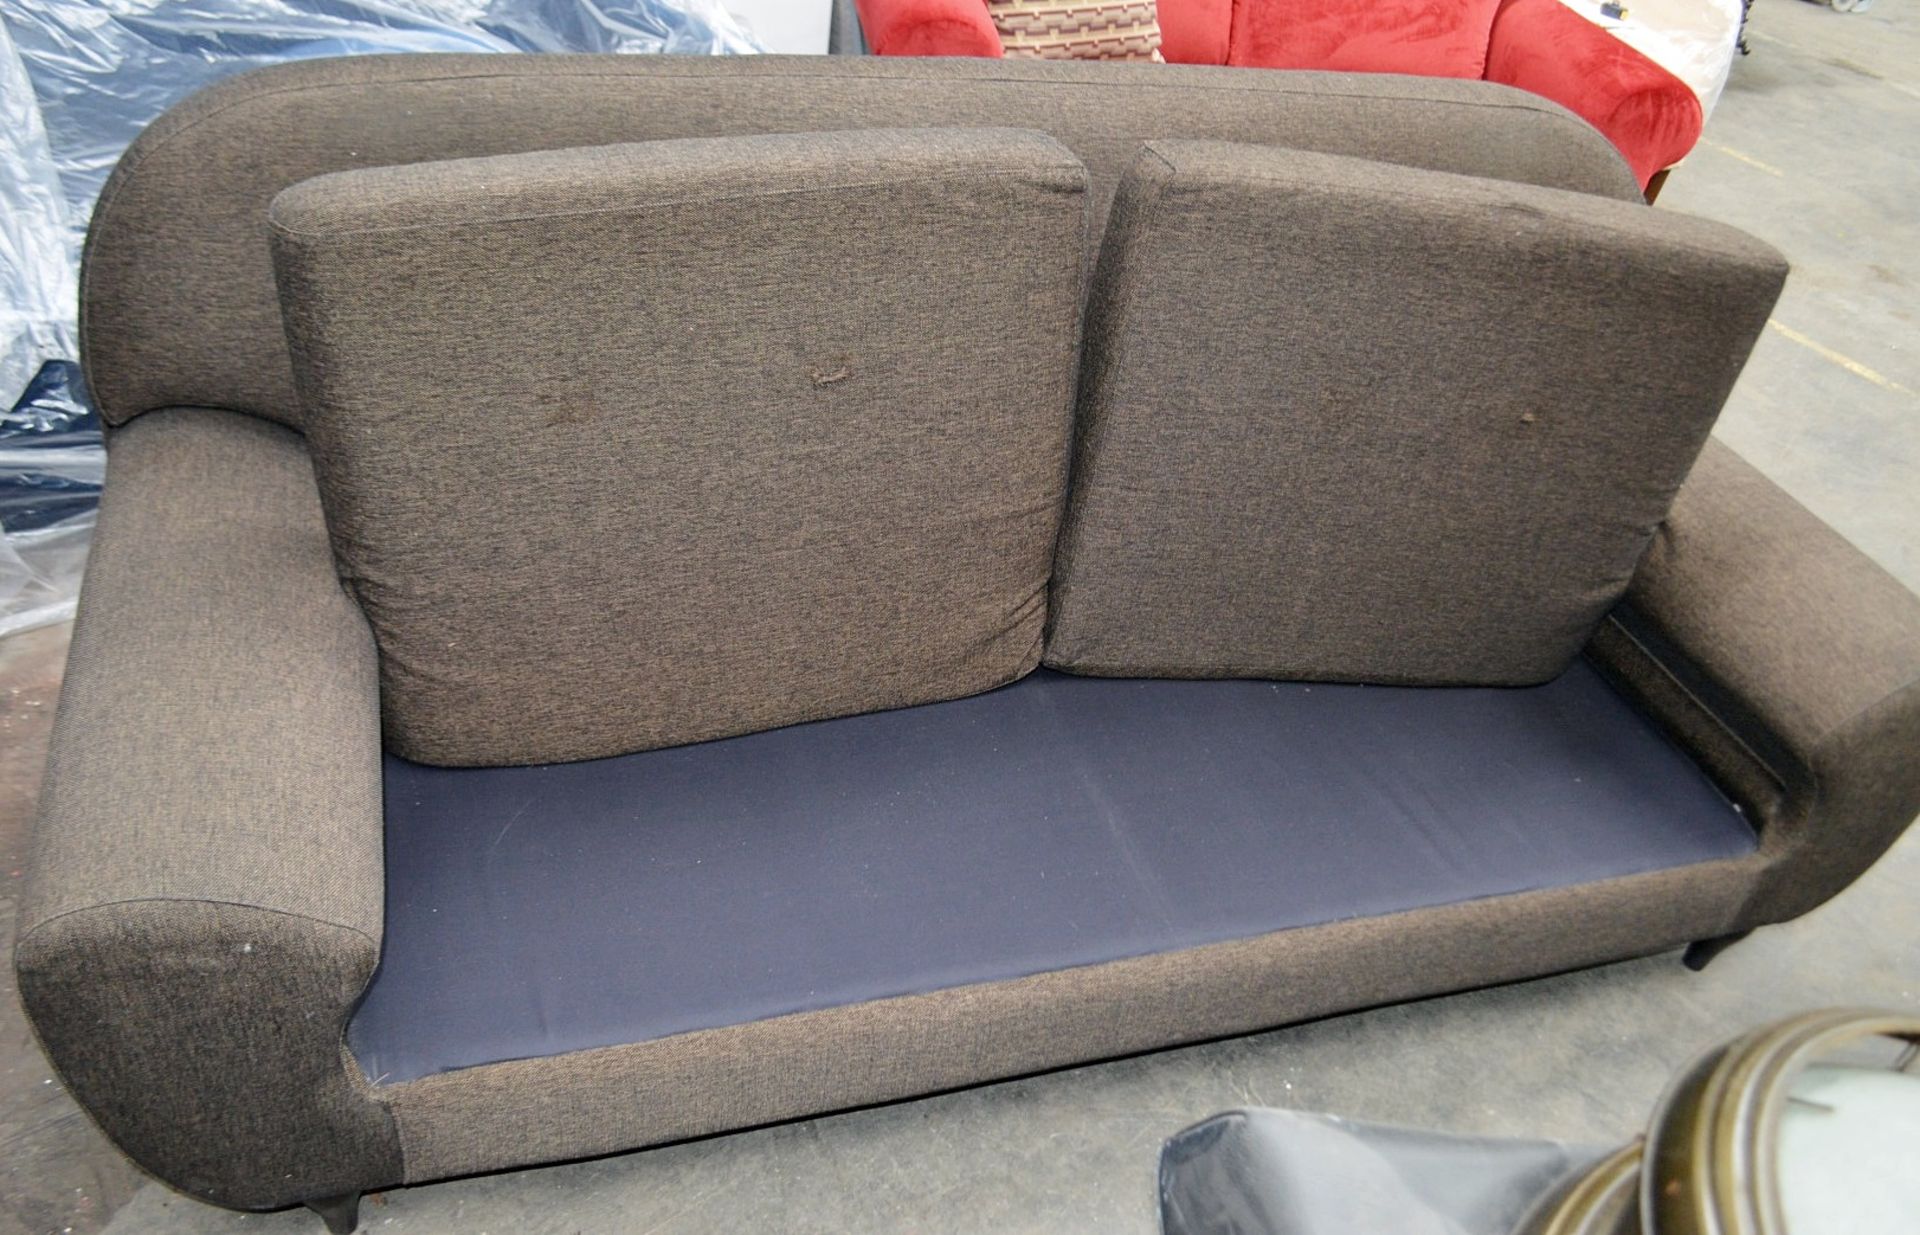 1 x Large Commercial 2-Metre Long Contemporary Sofa In A  Dark Brown/Bronze Woven Fabric - - Image 6 of 6